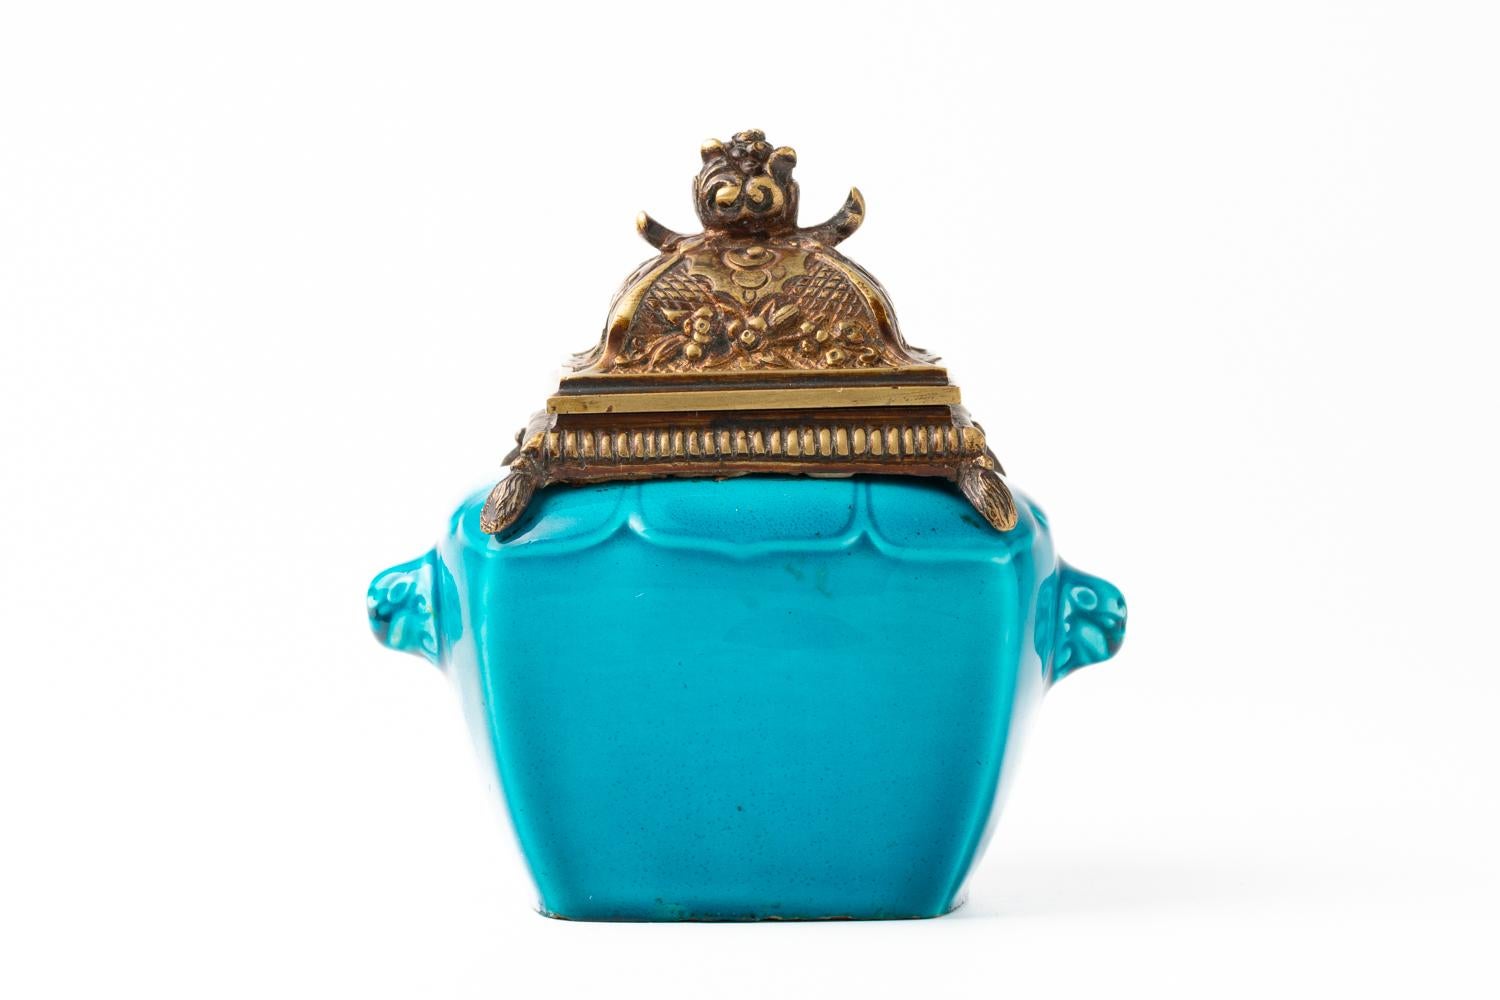 A 19th century Blue And Bronze Inkwell By Théodore Deck In Good Condition For Sale In Portland, England